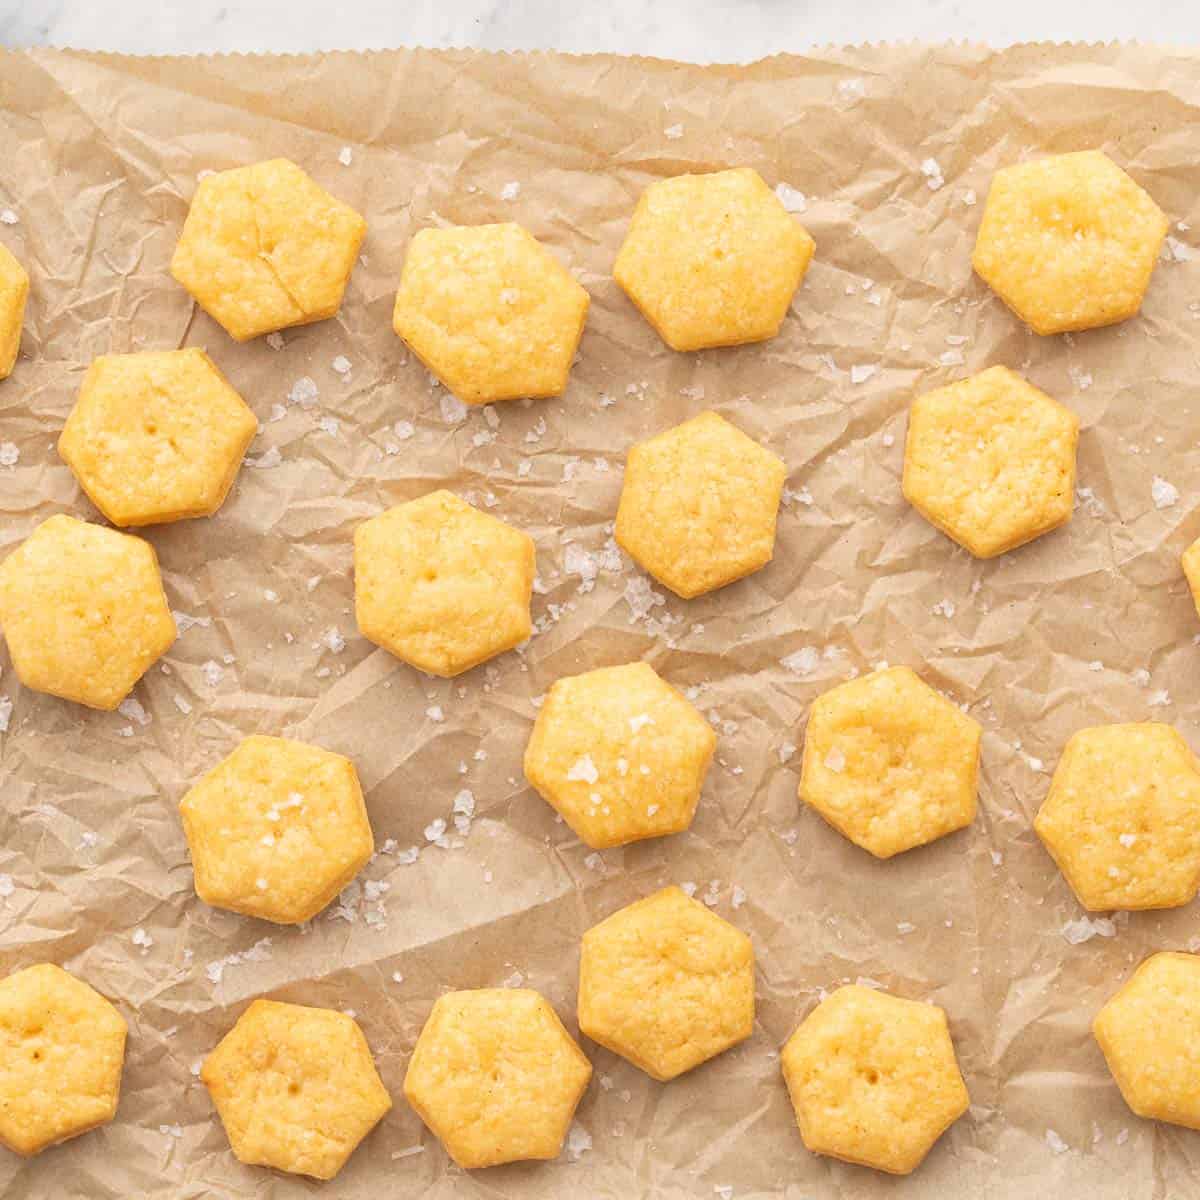 Golden brown baked cheese crackers resting on a lined baking tray with a sprinkling of sea salt on the top. 